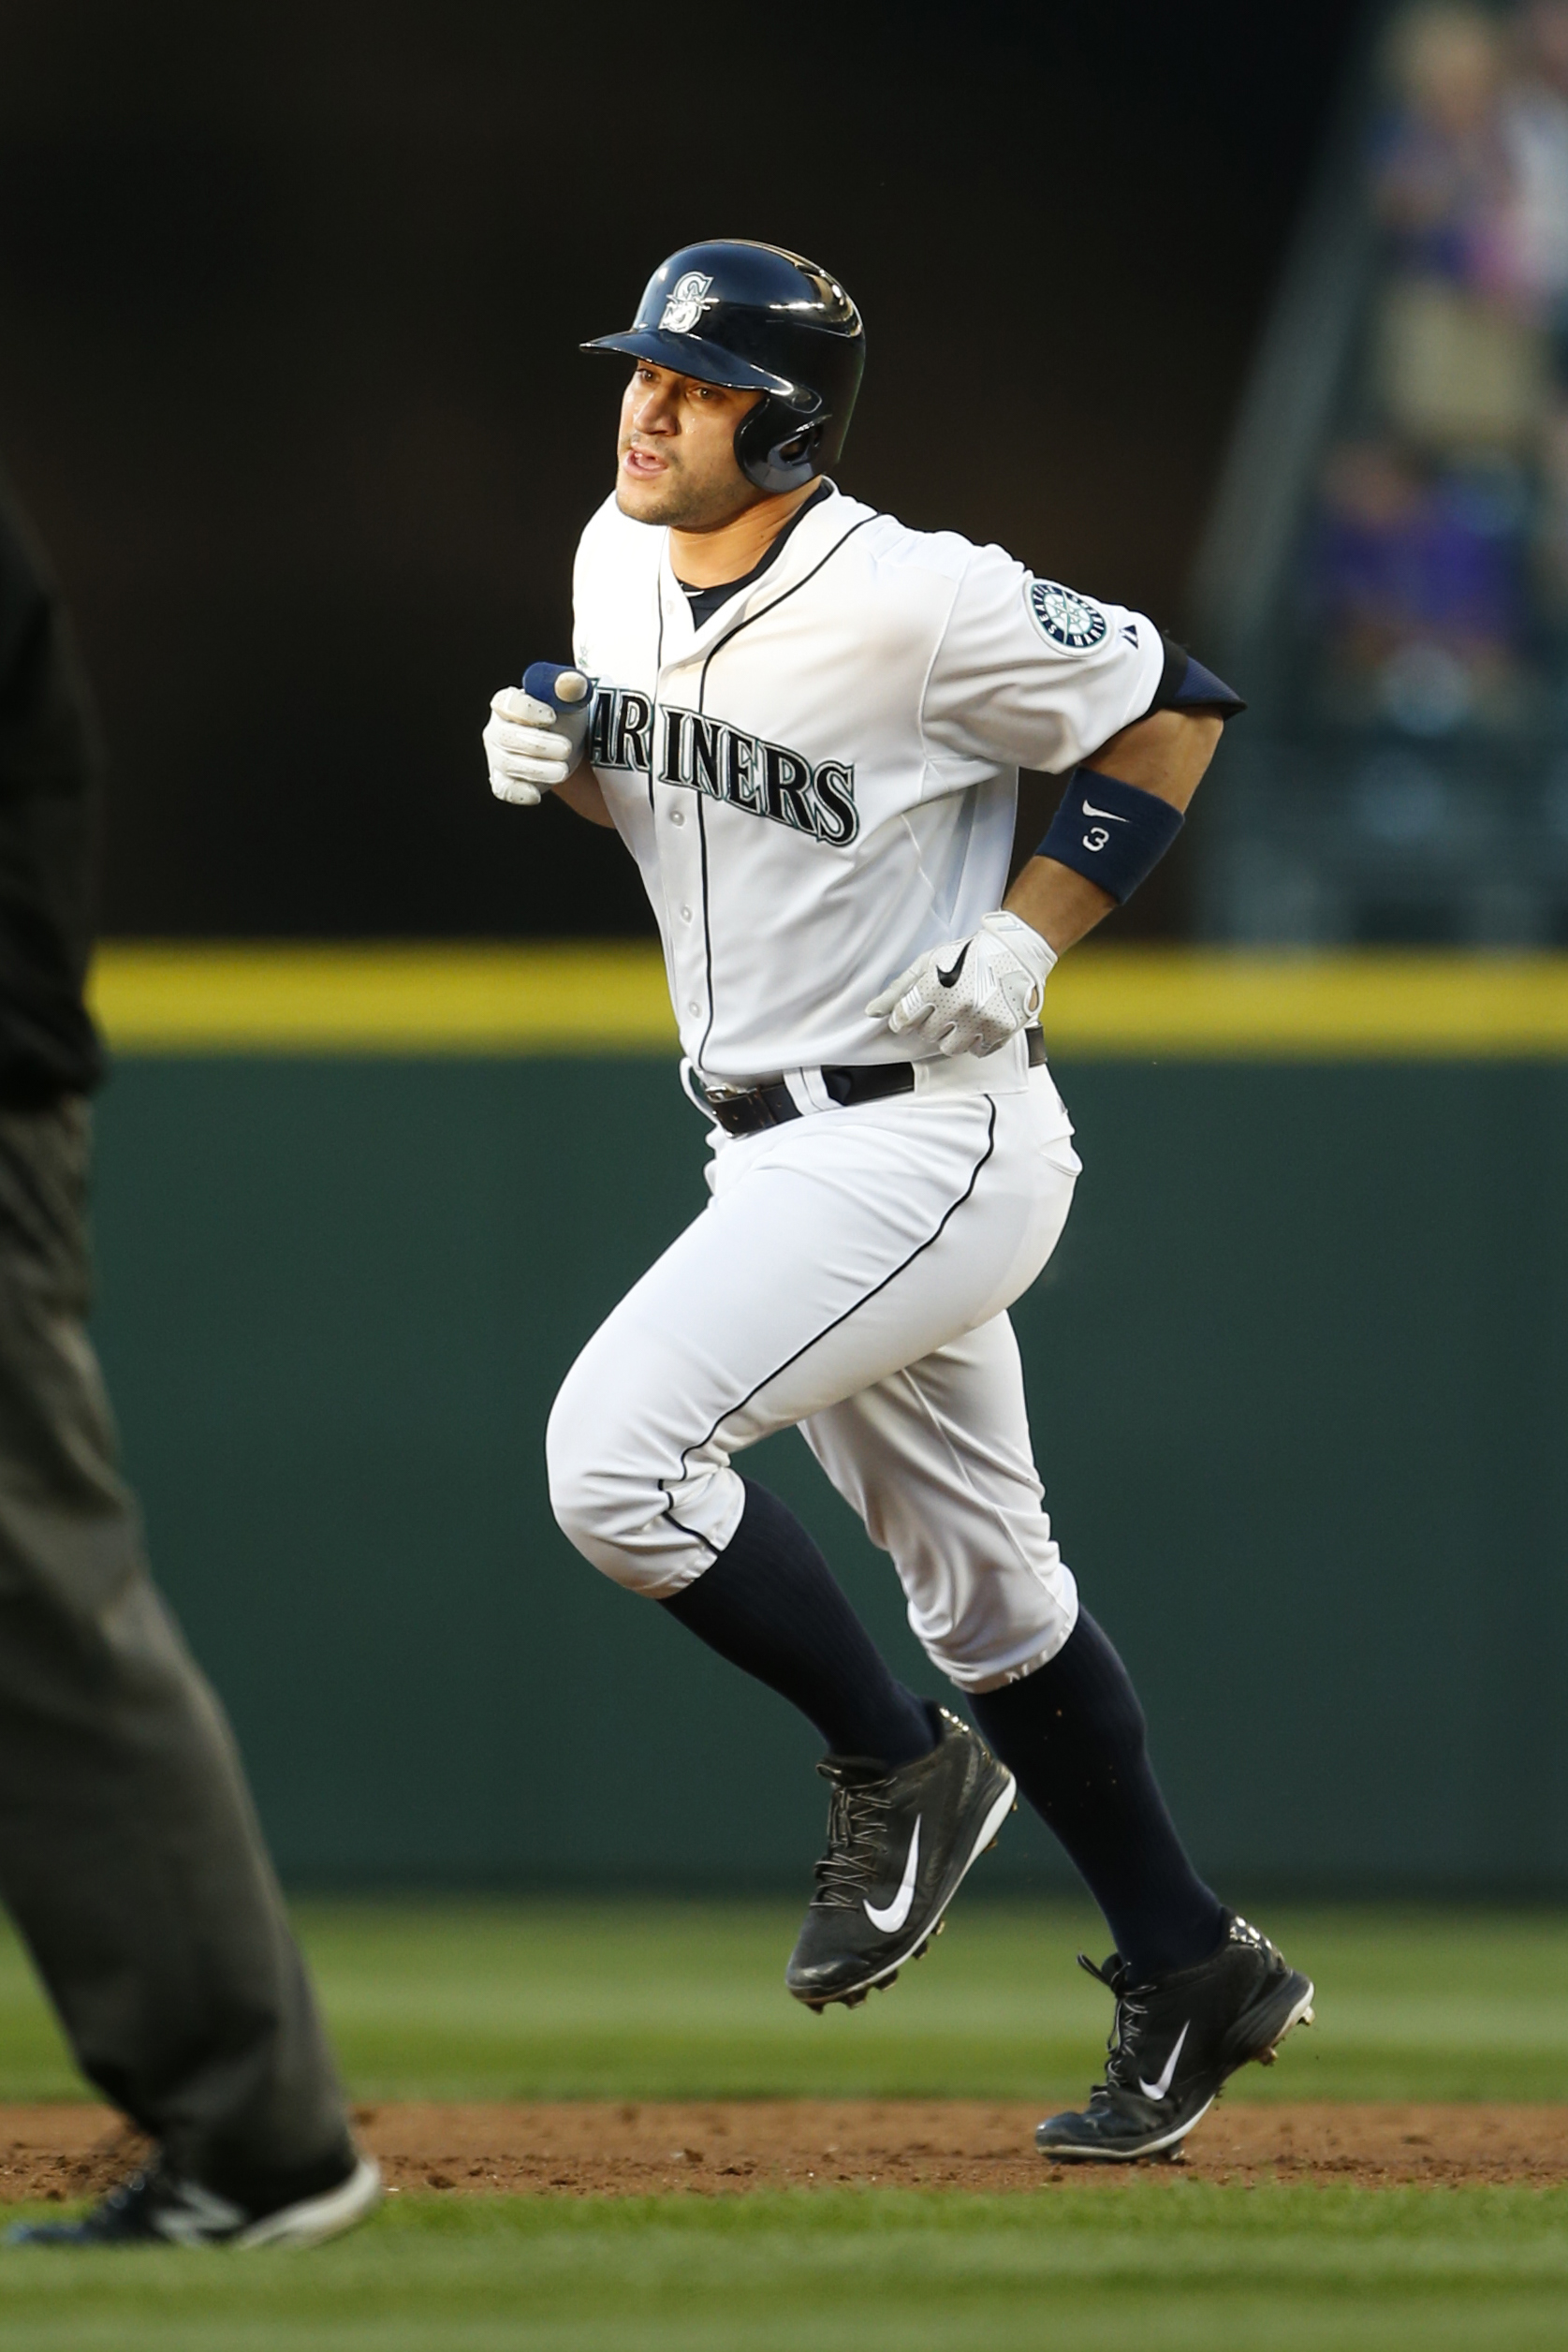 Mike Zunino continues tear, leads Mariners past Tigers 6-2